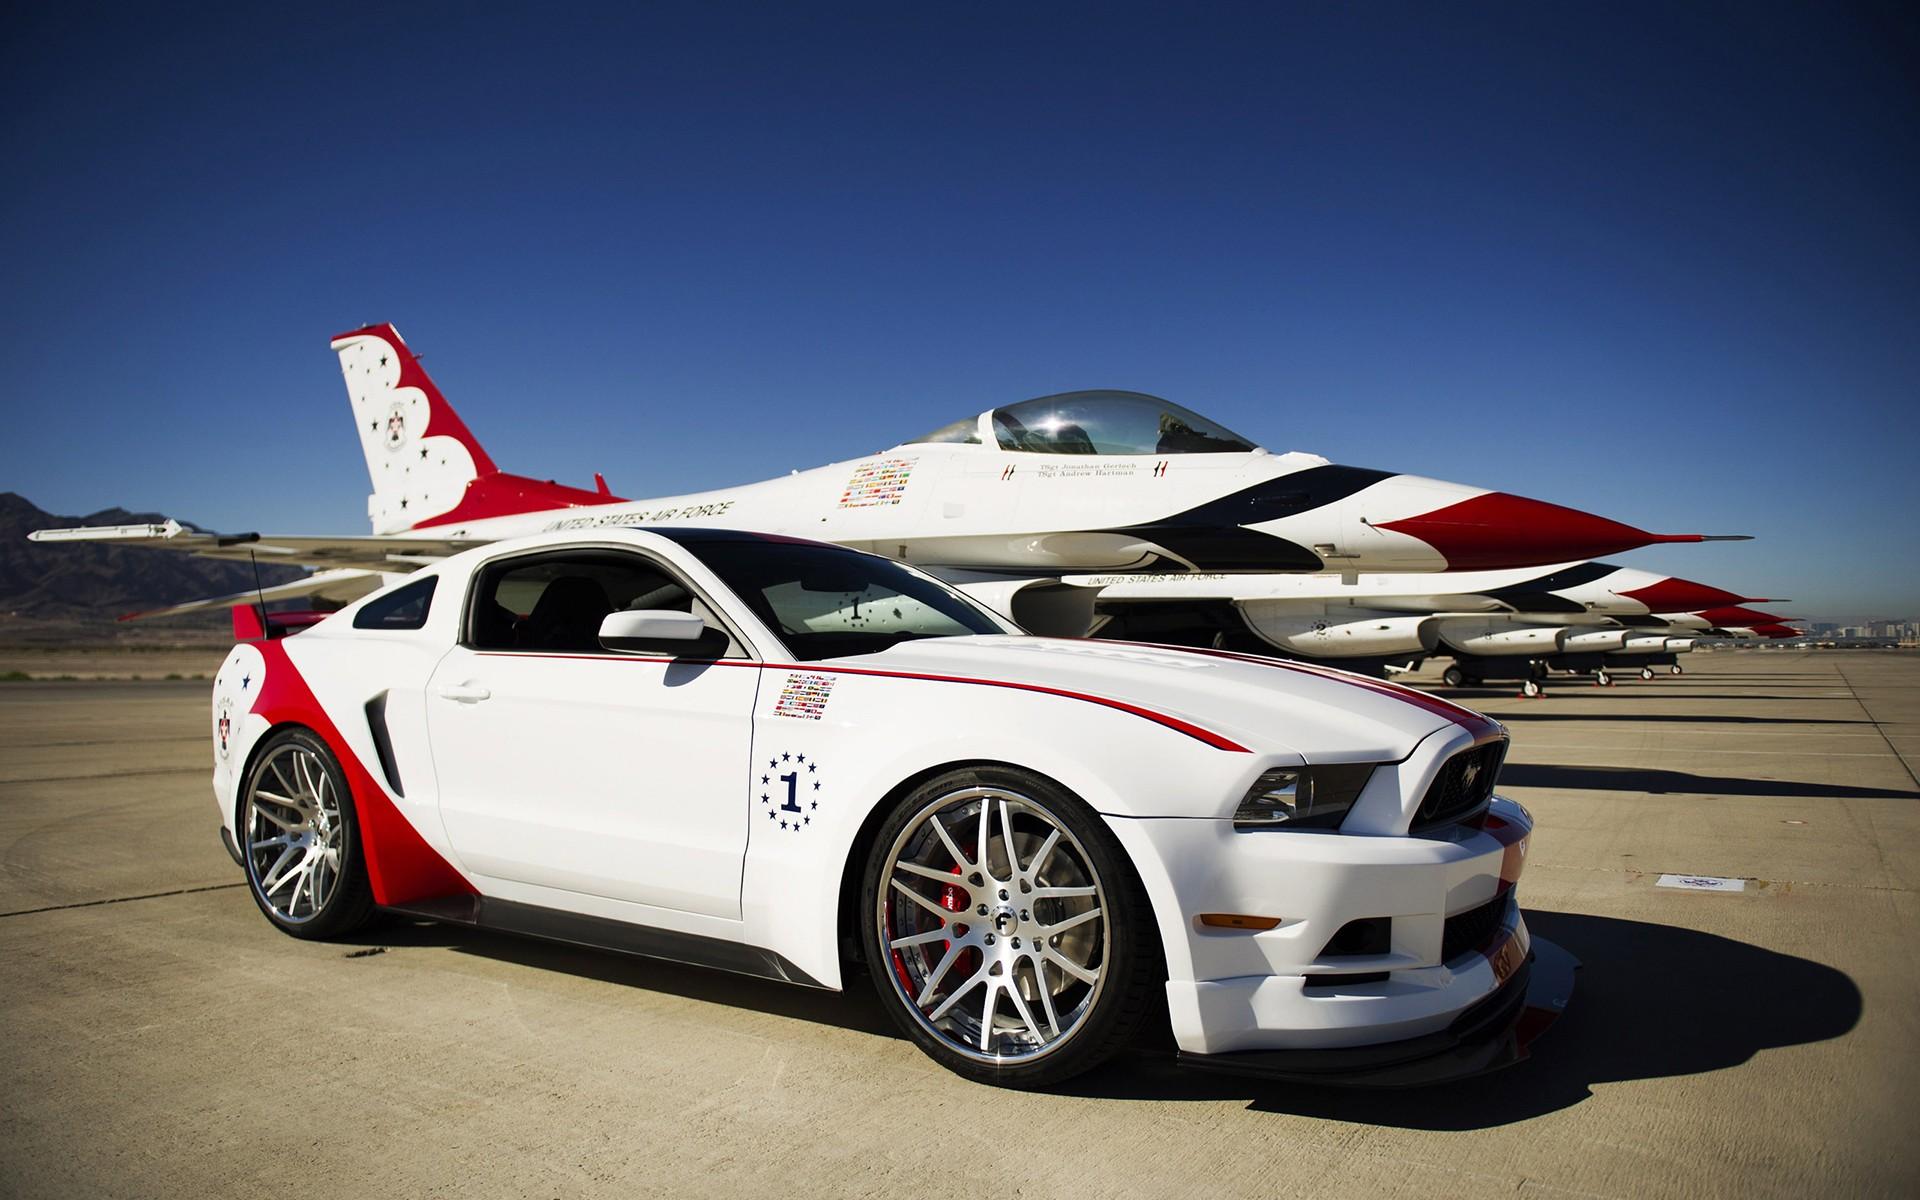 HD wallpaper, Military, Ford Mustang, Military Vehicle, White Cars, General Dynamics F 16 Fighting Falcon, Aircraft, Ford Mustang S 197 Ii, Military Aircraft, Ford, Car, Vehicle, Ford Mustang Gt Us Airforce Edition, Thunderbirds